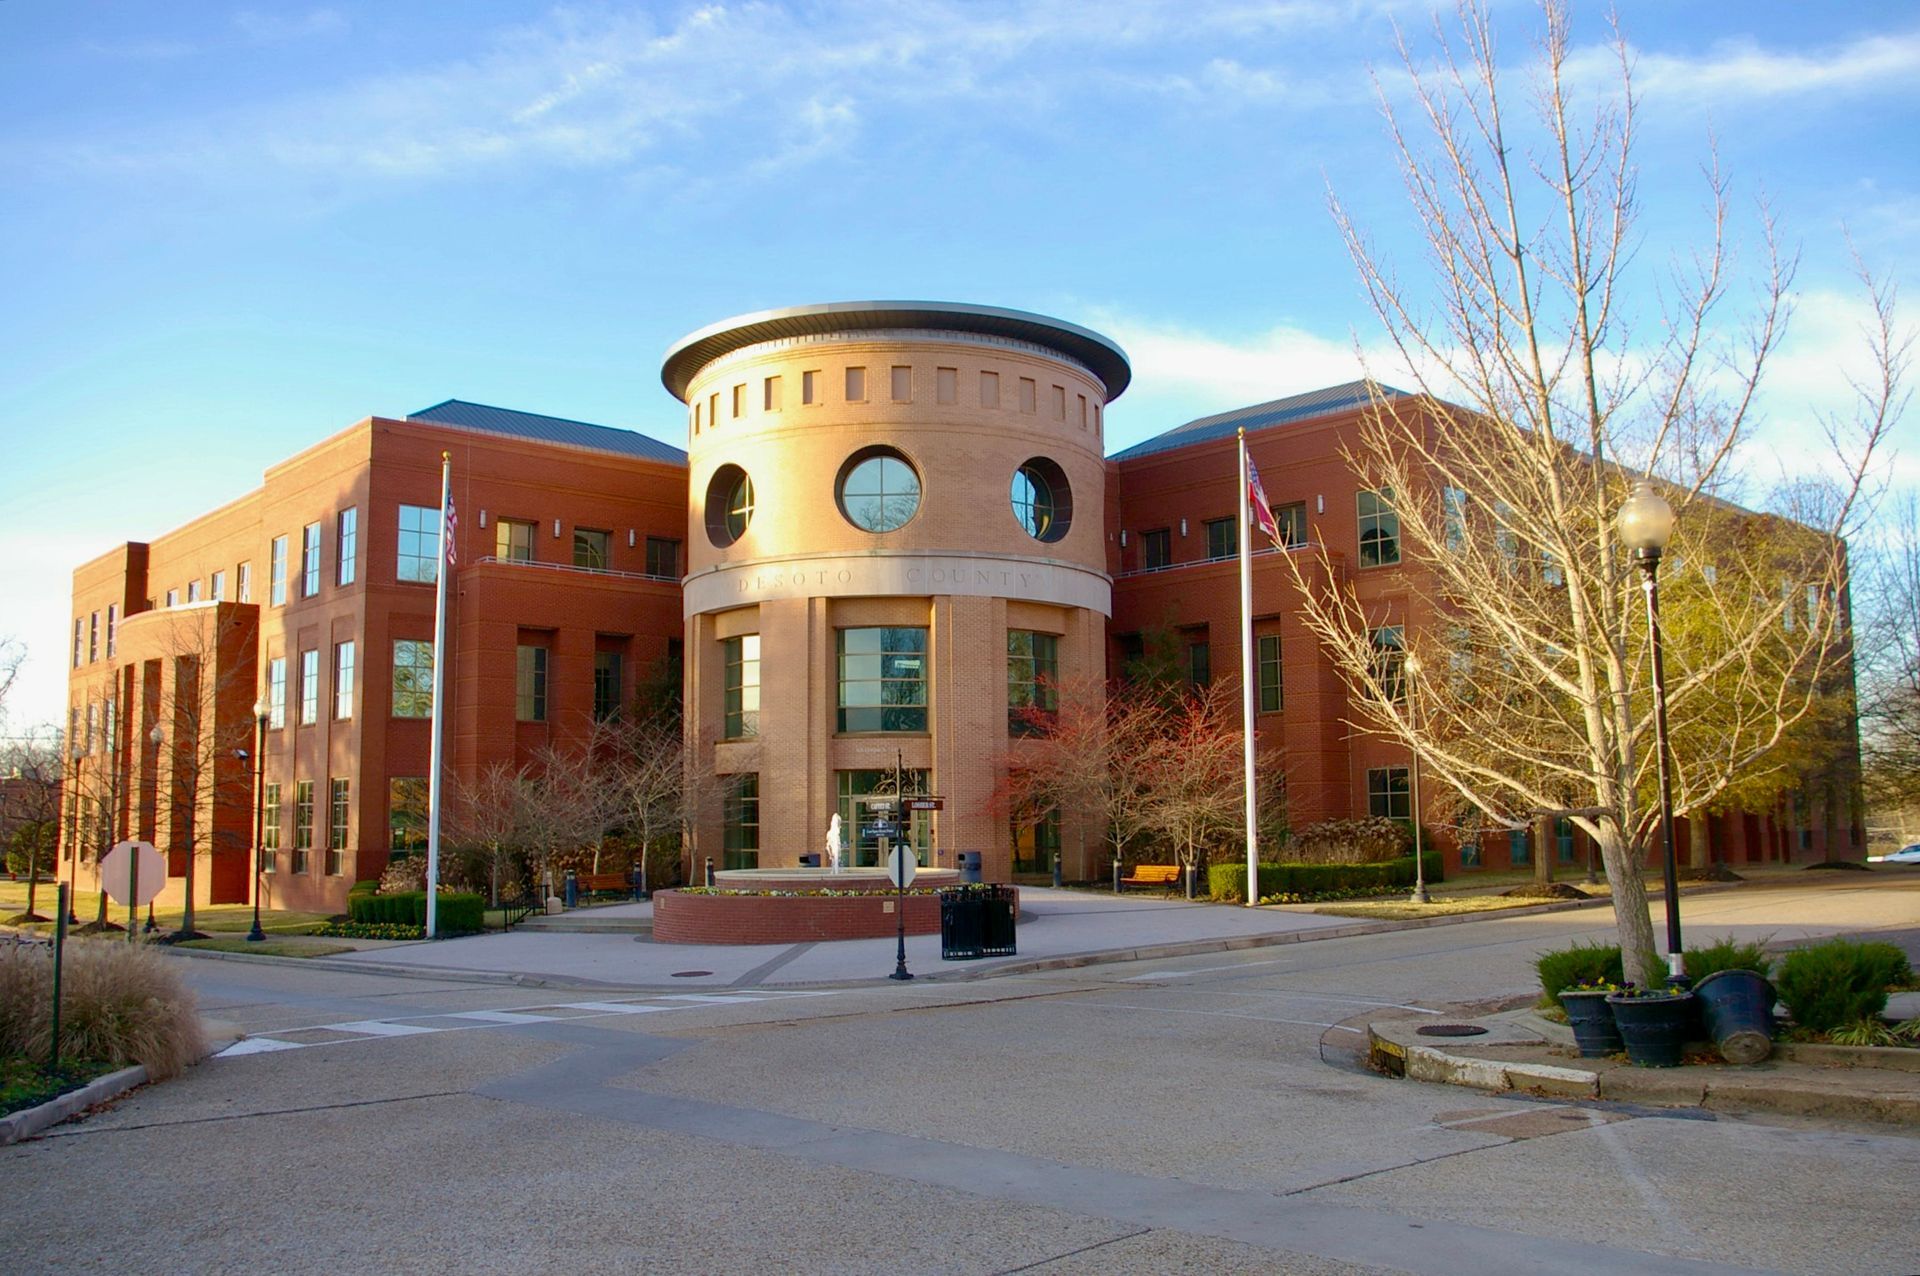 A large brick building with a fountain in front of it